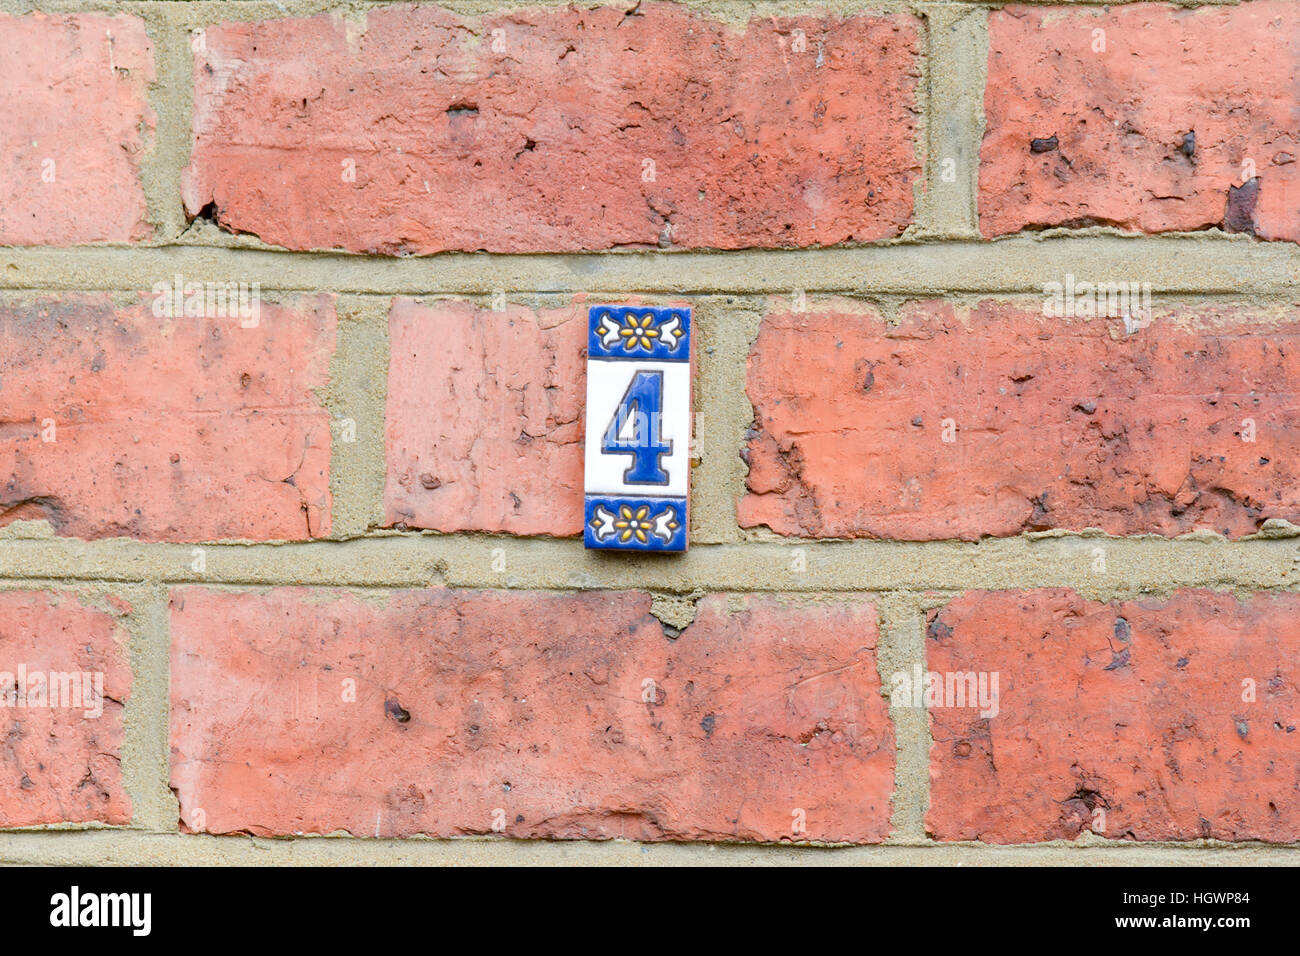 House number 4 sign - small ceramic tile on red brick wall Stock Photo